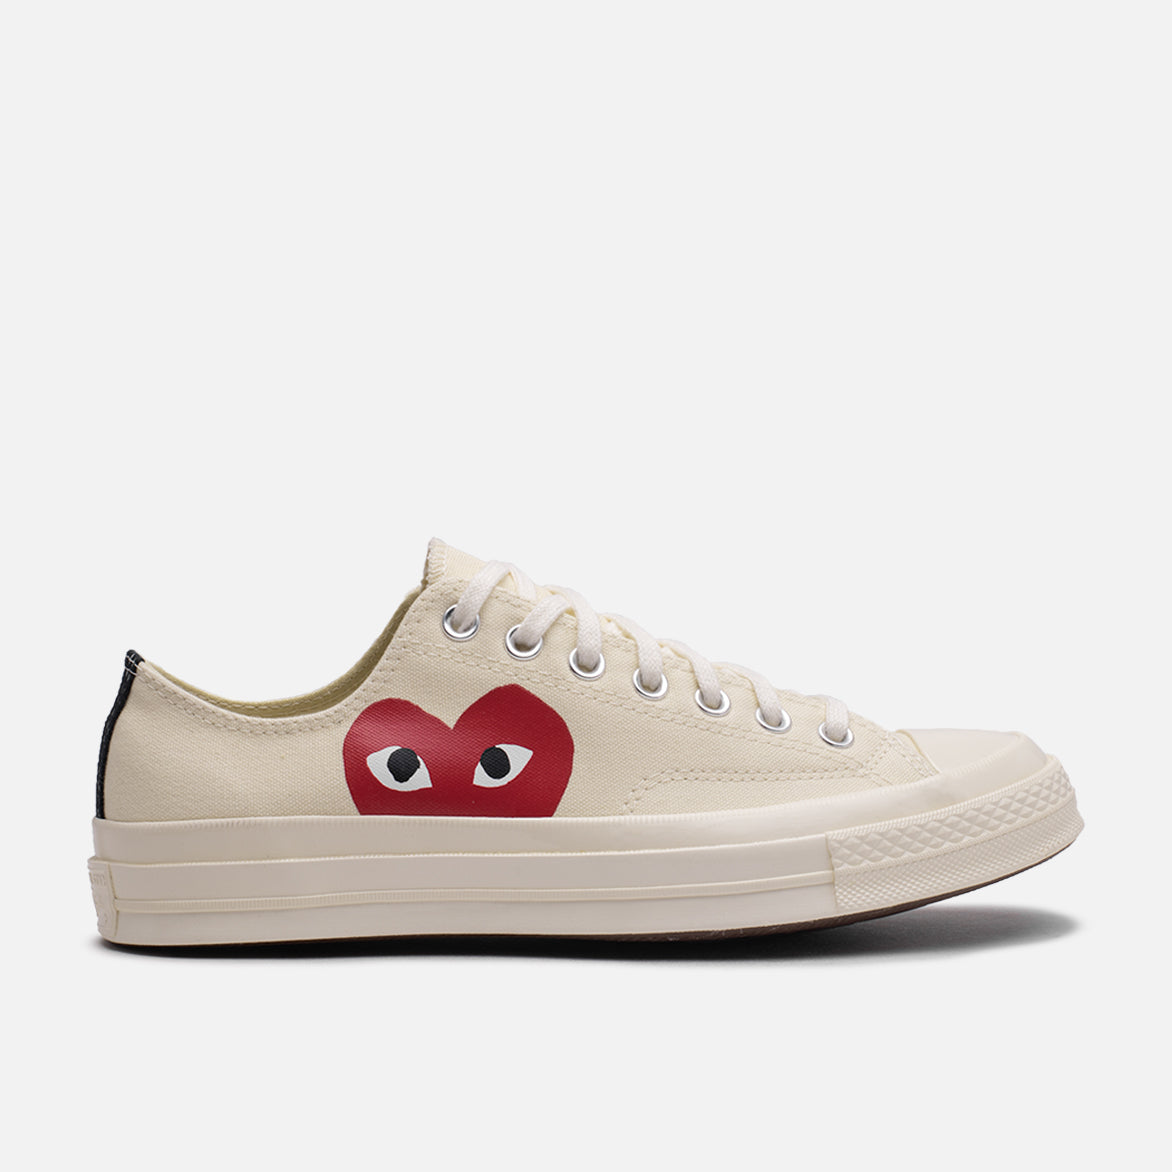 CDG PLAY X CONVERSE CHUCK TAYLOR ALL STAR '70 OX - WHITE ...